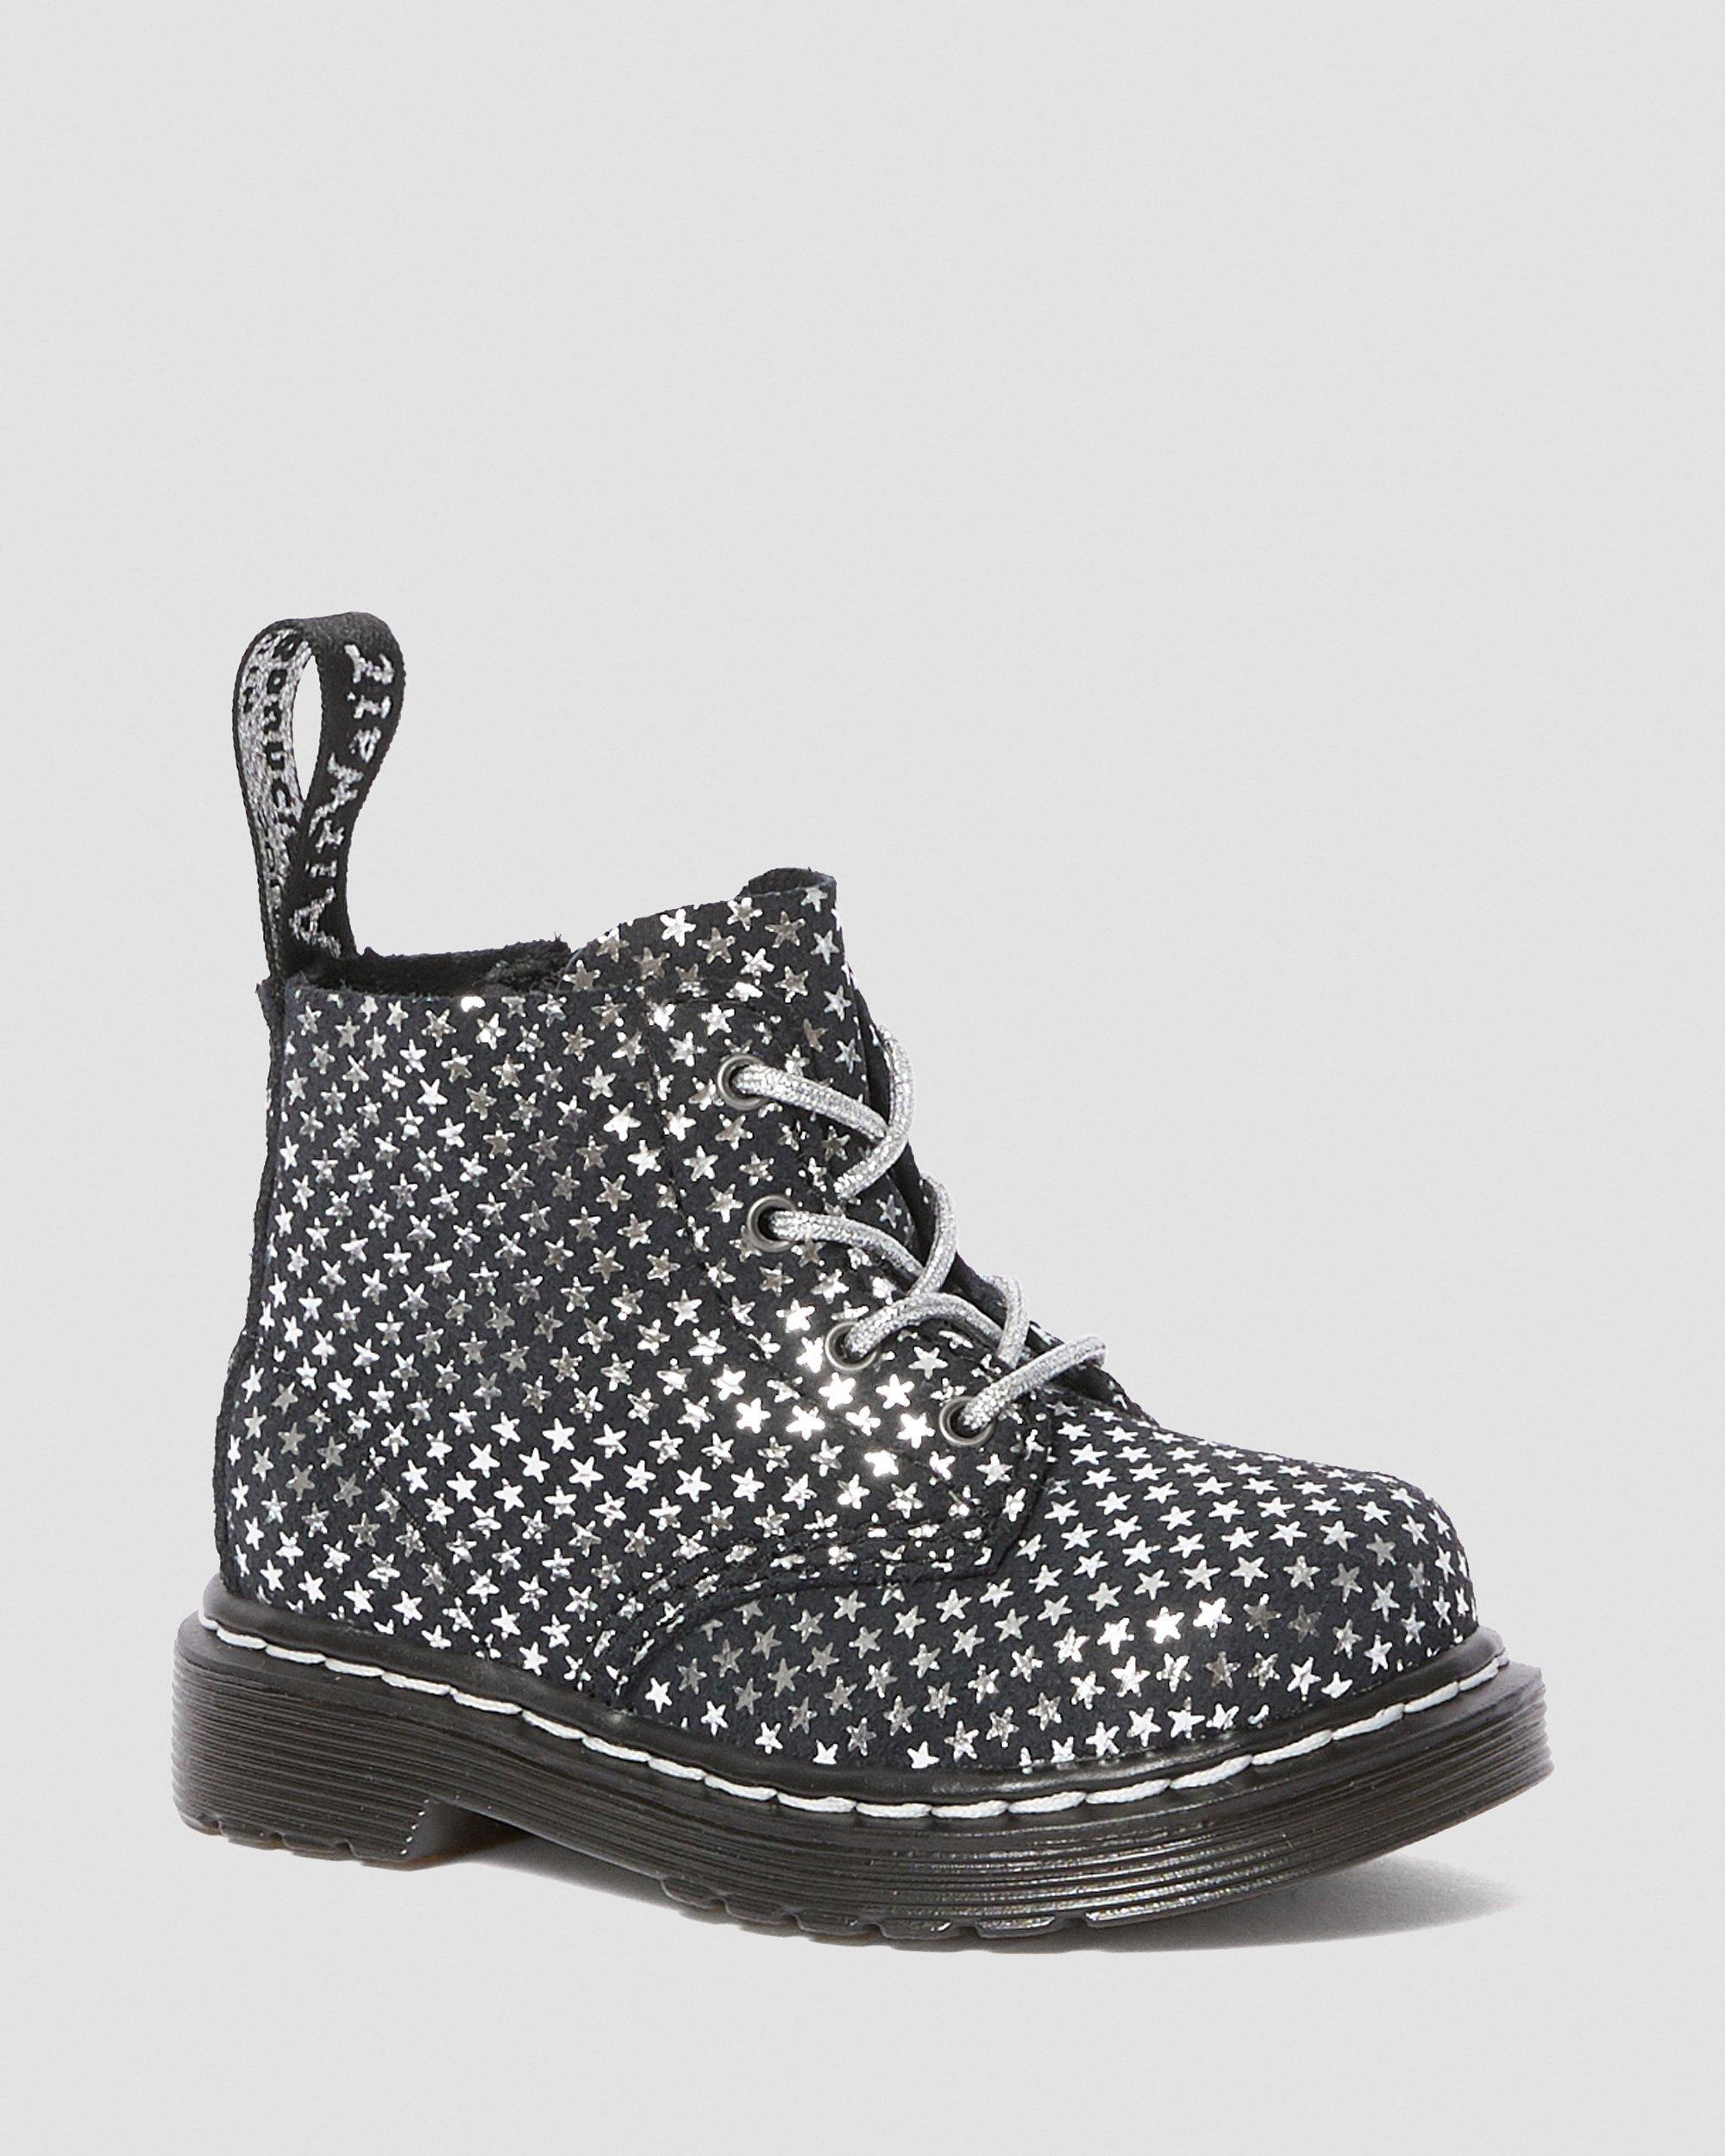 Infant 1460 Suede Metallic Star Boots in Black+Silver